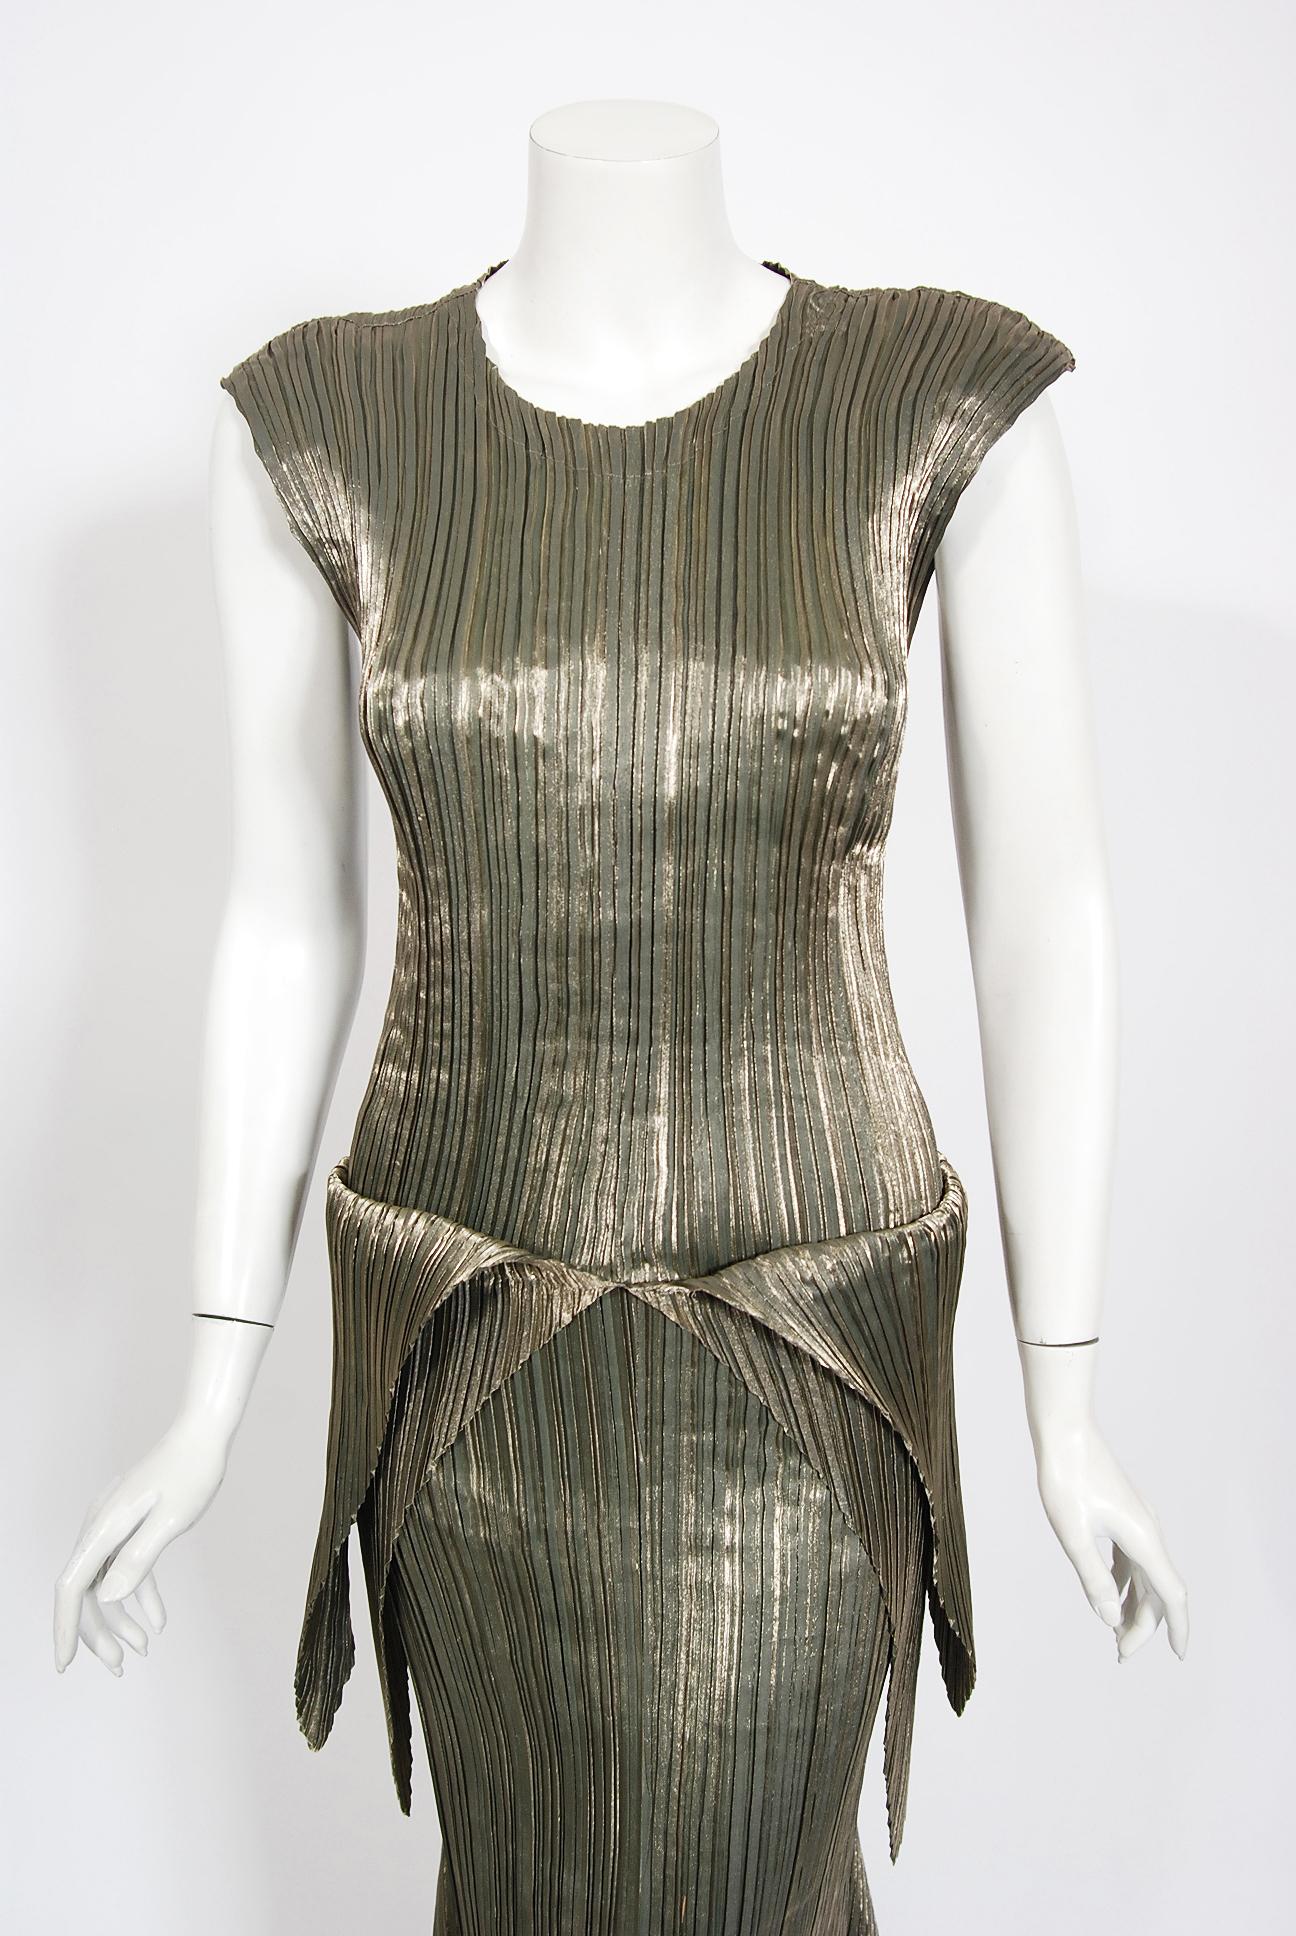 Gorgeous and highly desirable Issey Miyake metallic gold pleated sculptural dress set dating back to his museum held 1989-90 'Mercury Pleats' Collection. As one of the world's most innovative fashion designers, Issey Miyake experimented with new